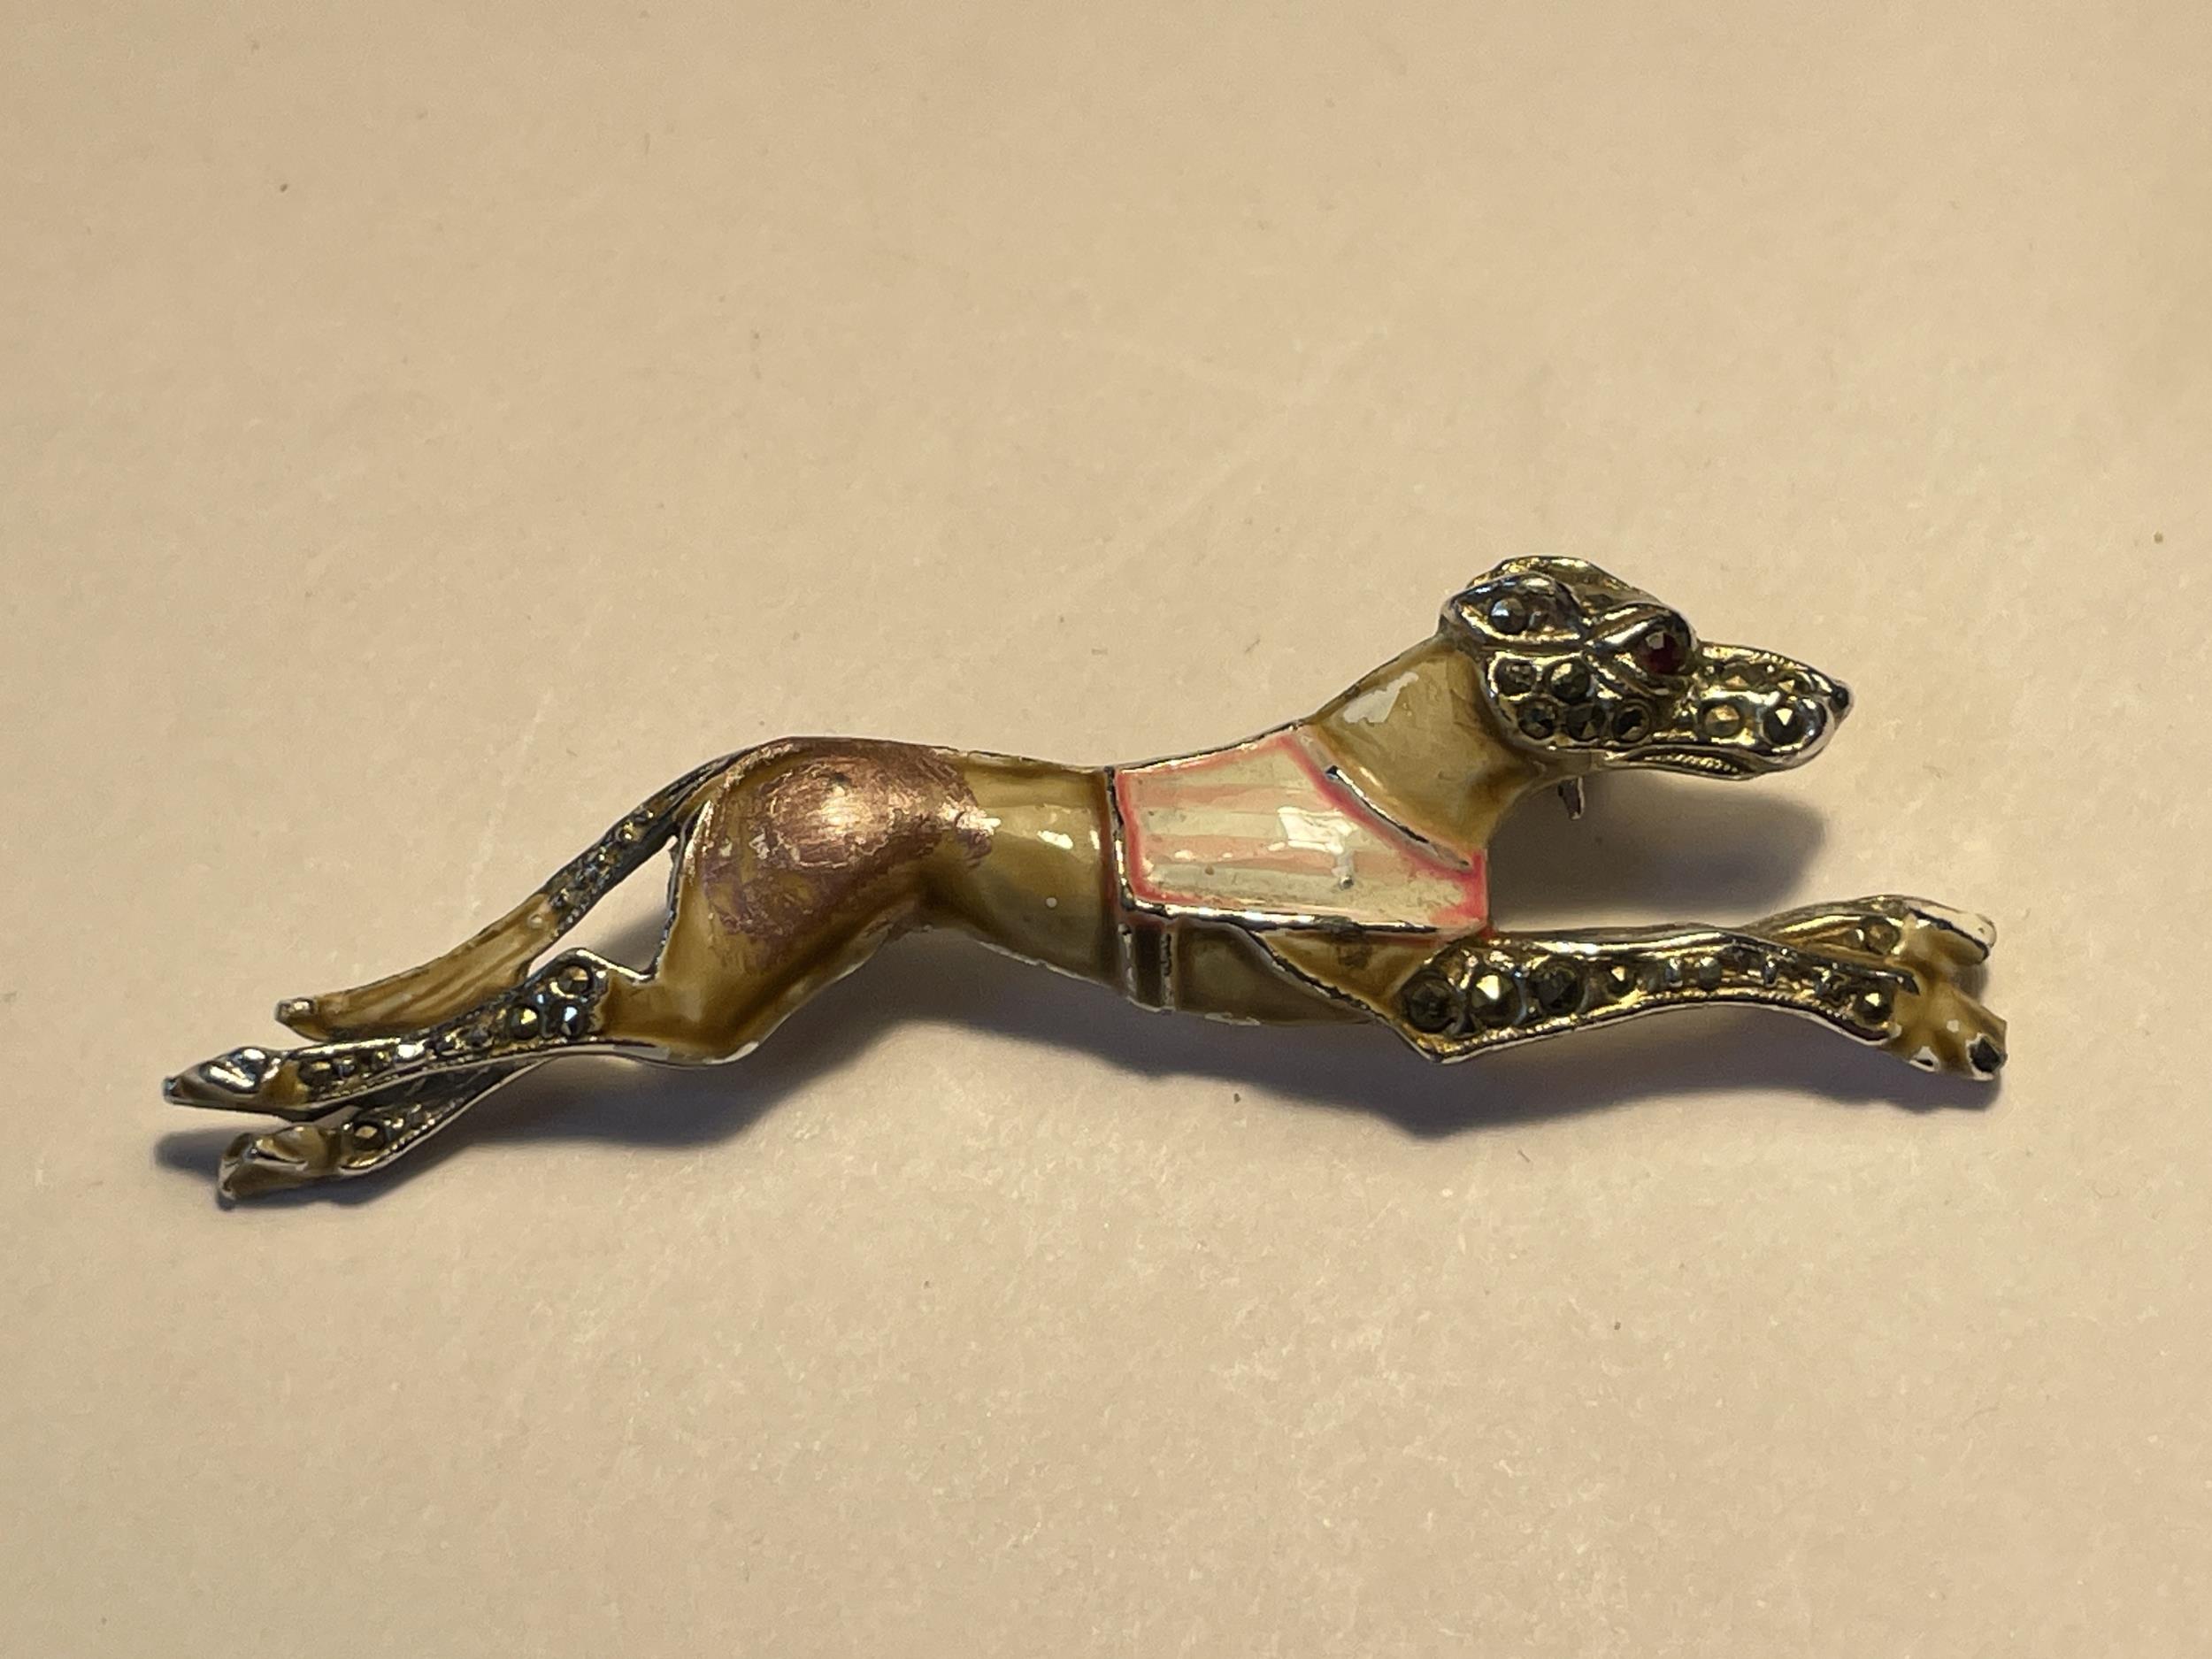 A VINTAGE ENAMELLED GREYHOUND BROOCH WITH A PRESENTATION BOX - Image 2 of 5